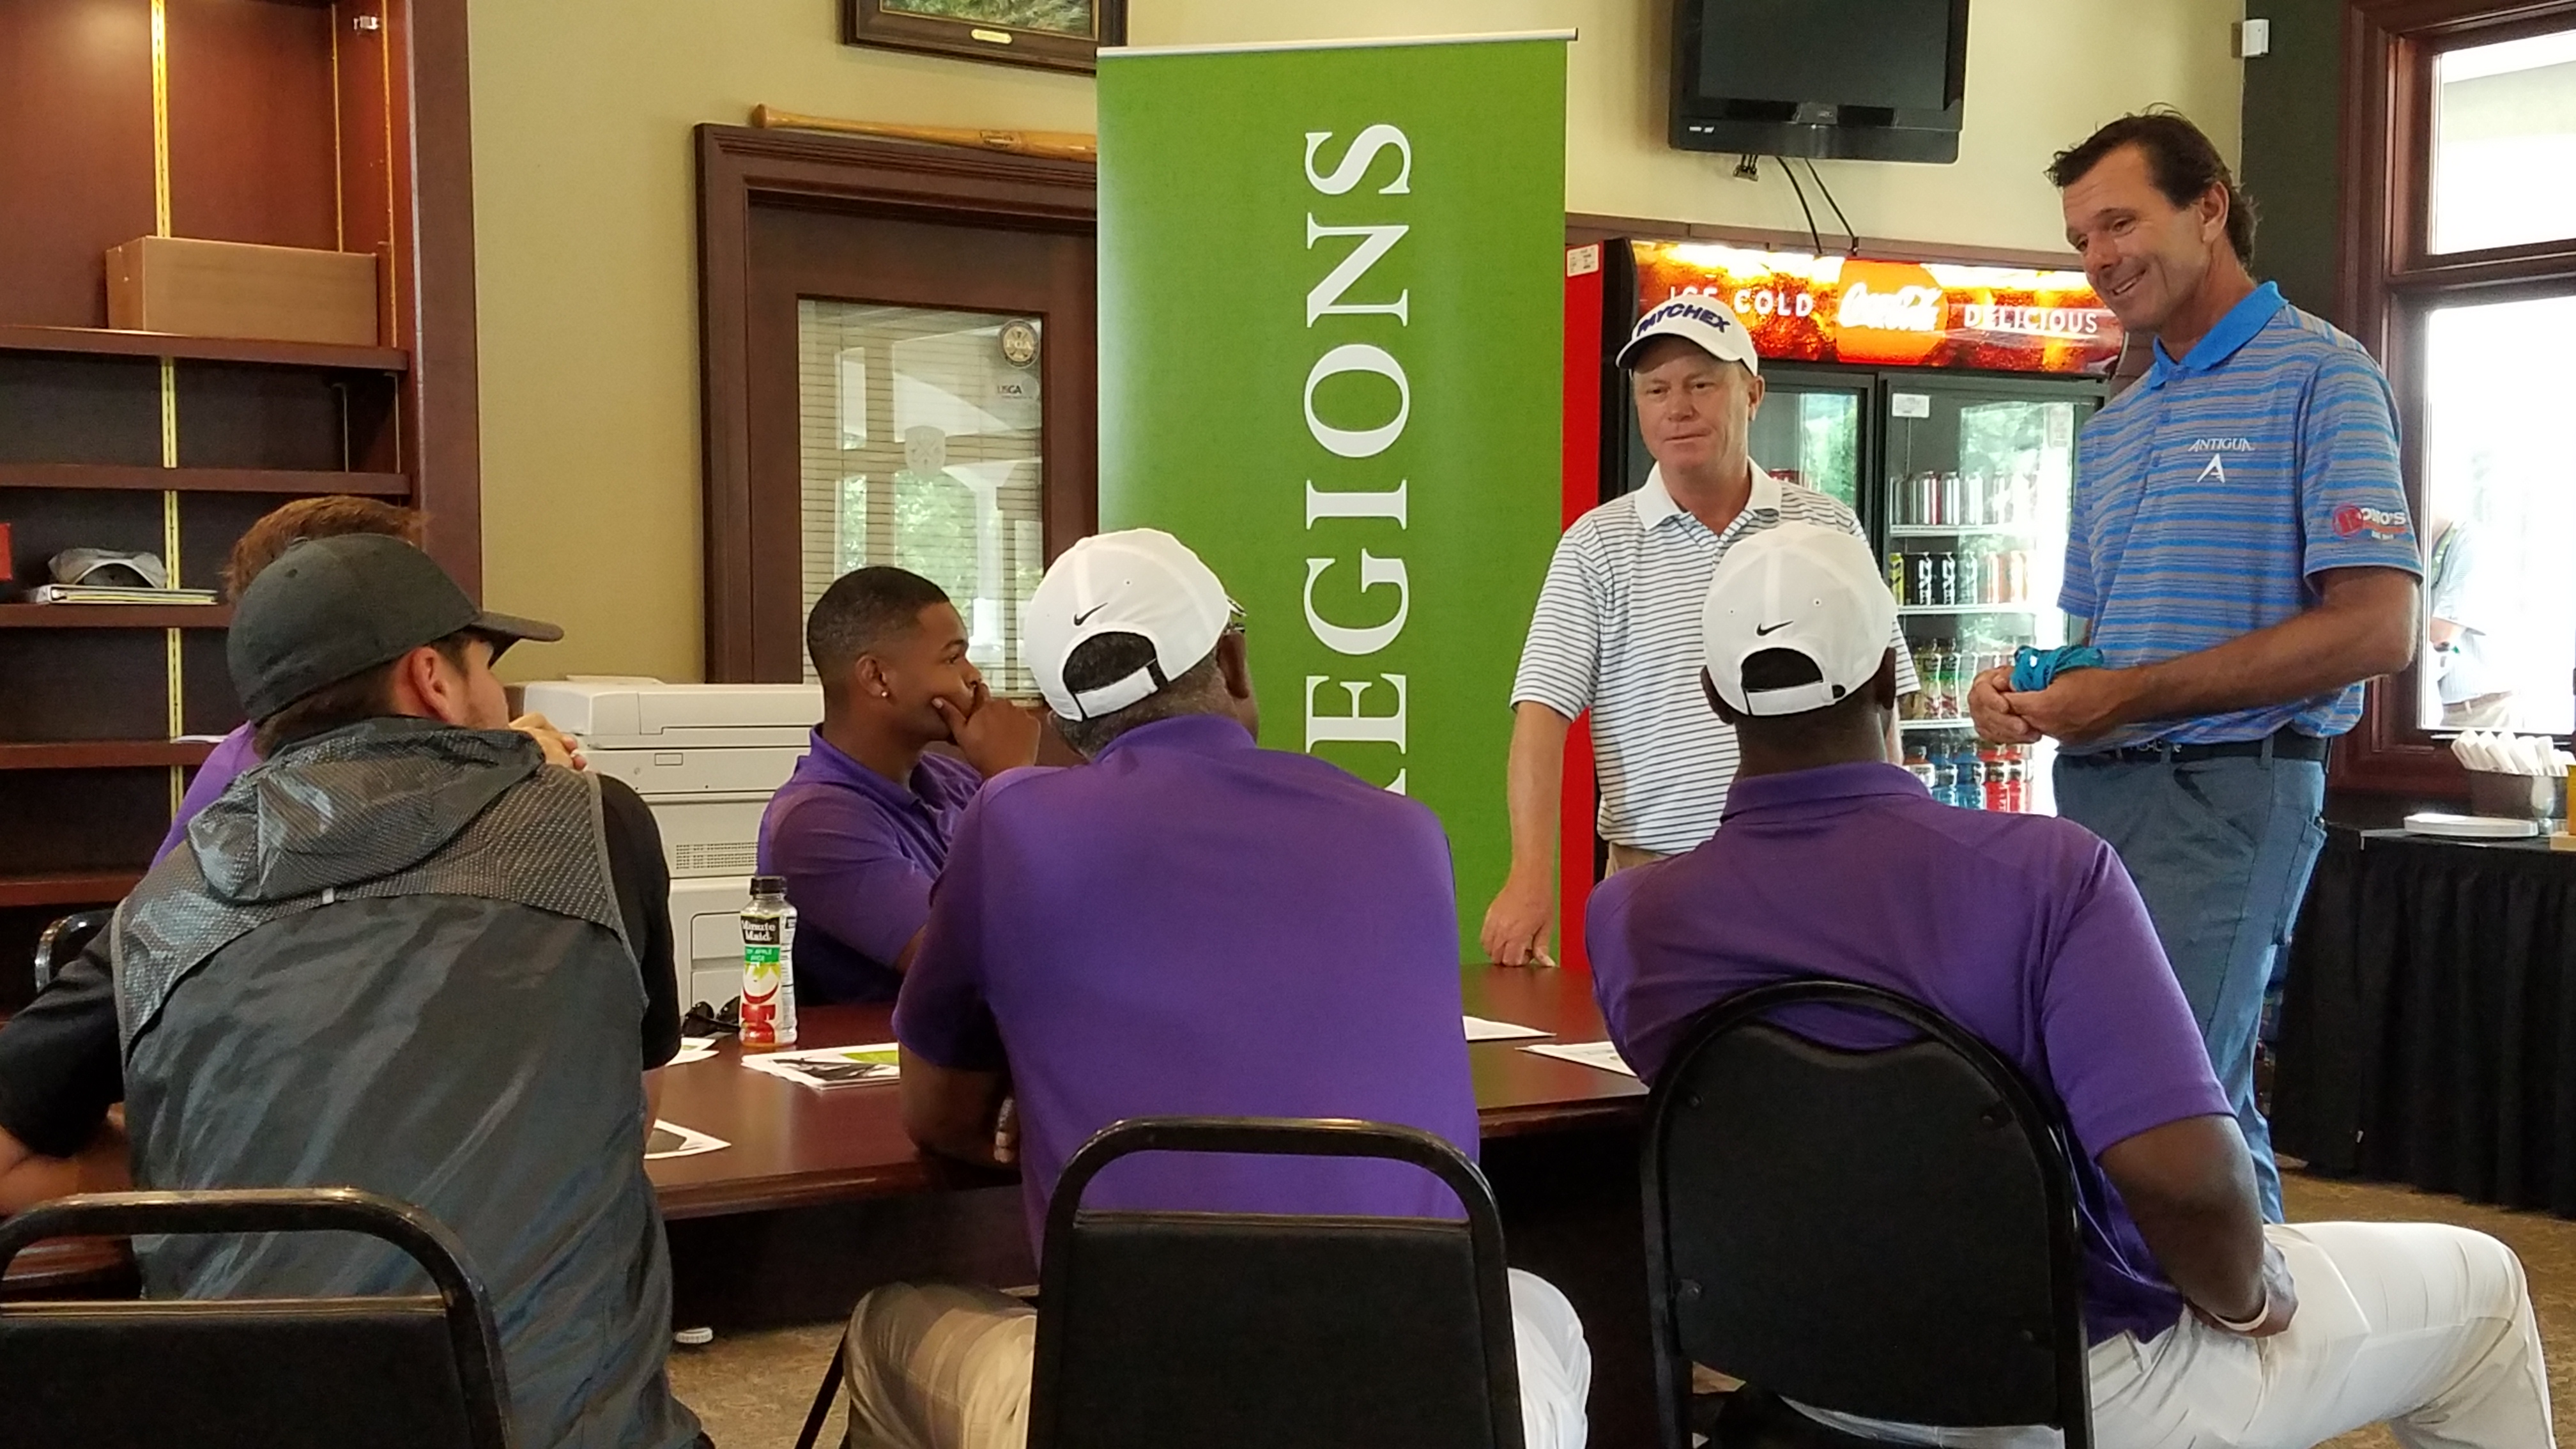 Miles College Golf Team seated at table listening to Jeff Sluman and Len Mattiace